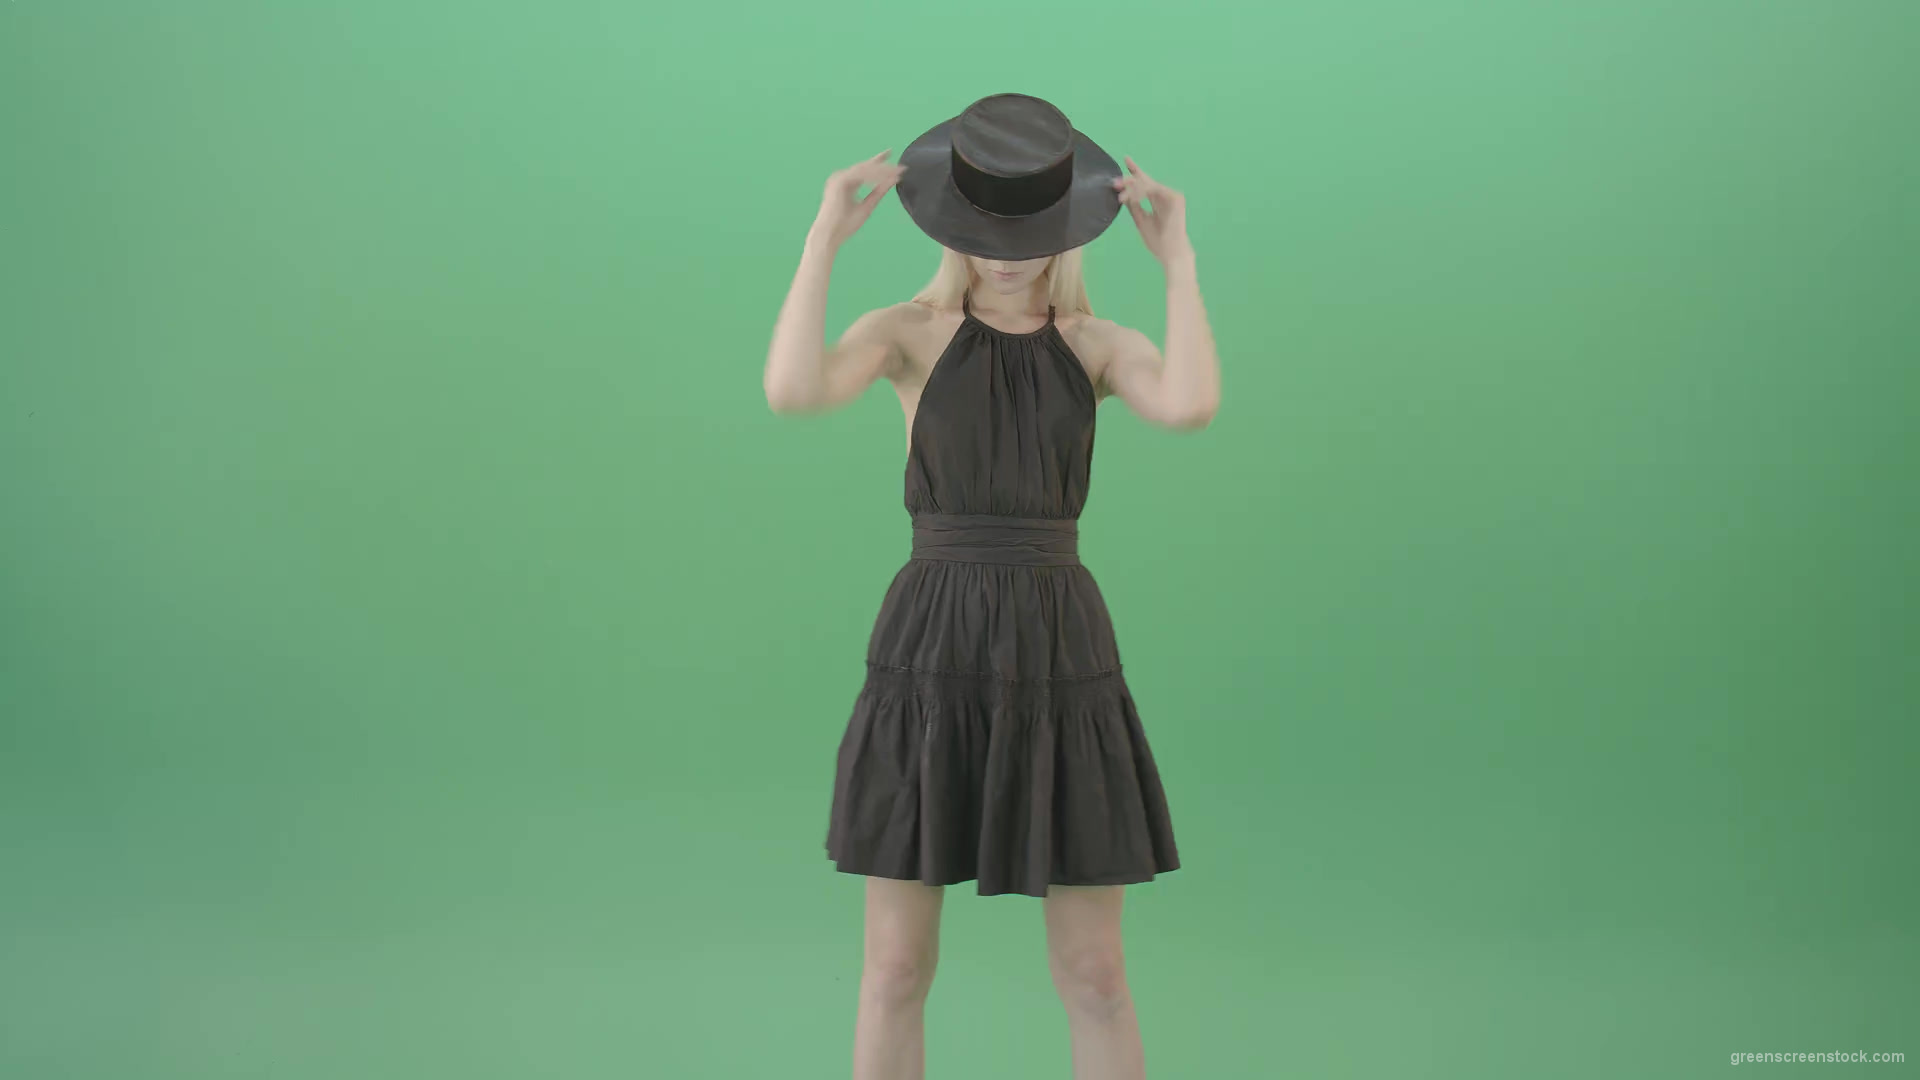 Video-Art-Fashion-Dance-by-Girl-in-black-outlet-and-dark-hat-on-green-screen-Video-Footage-1920_001 Green Screen Stock